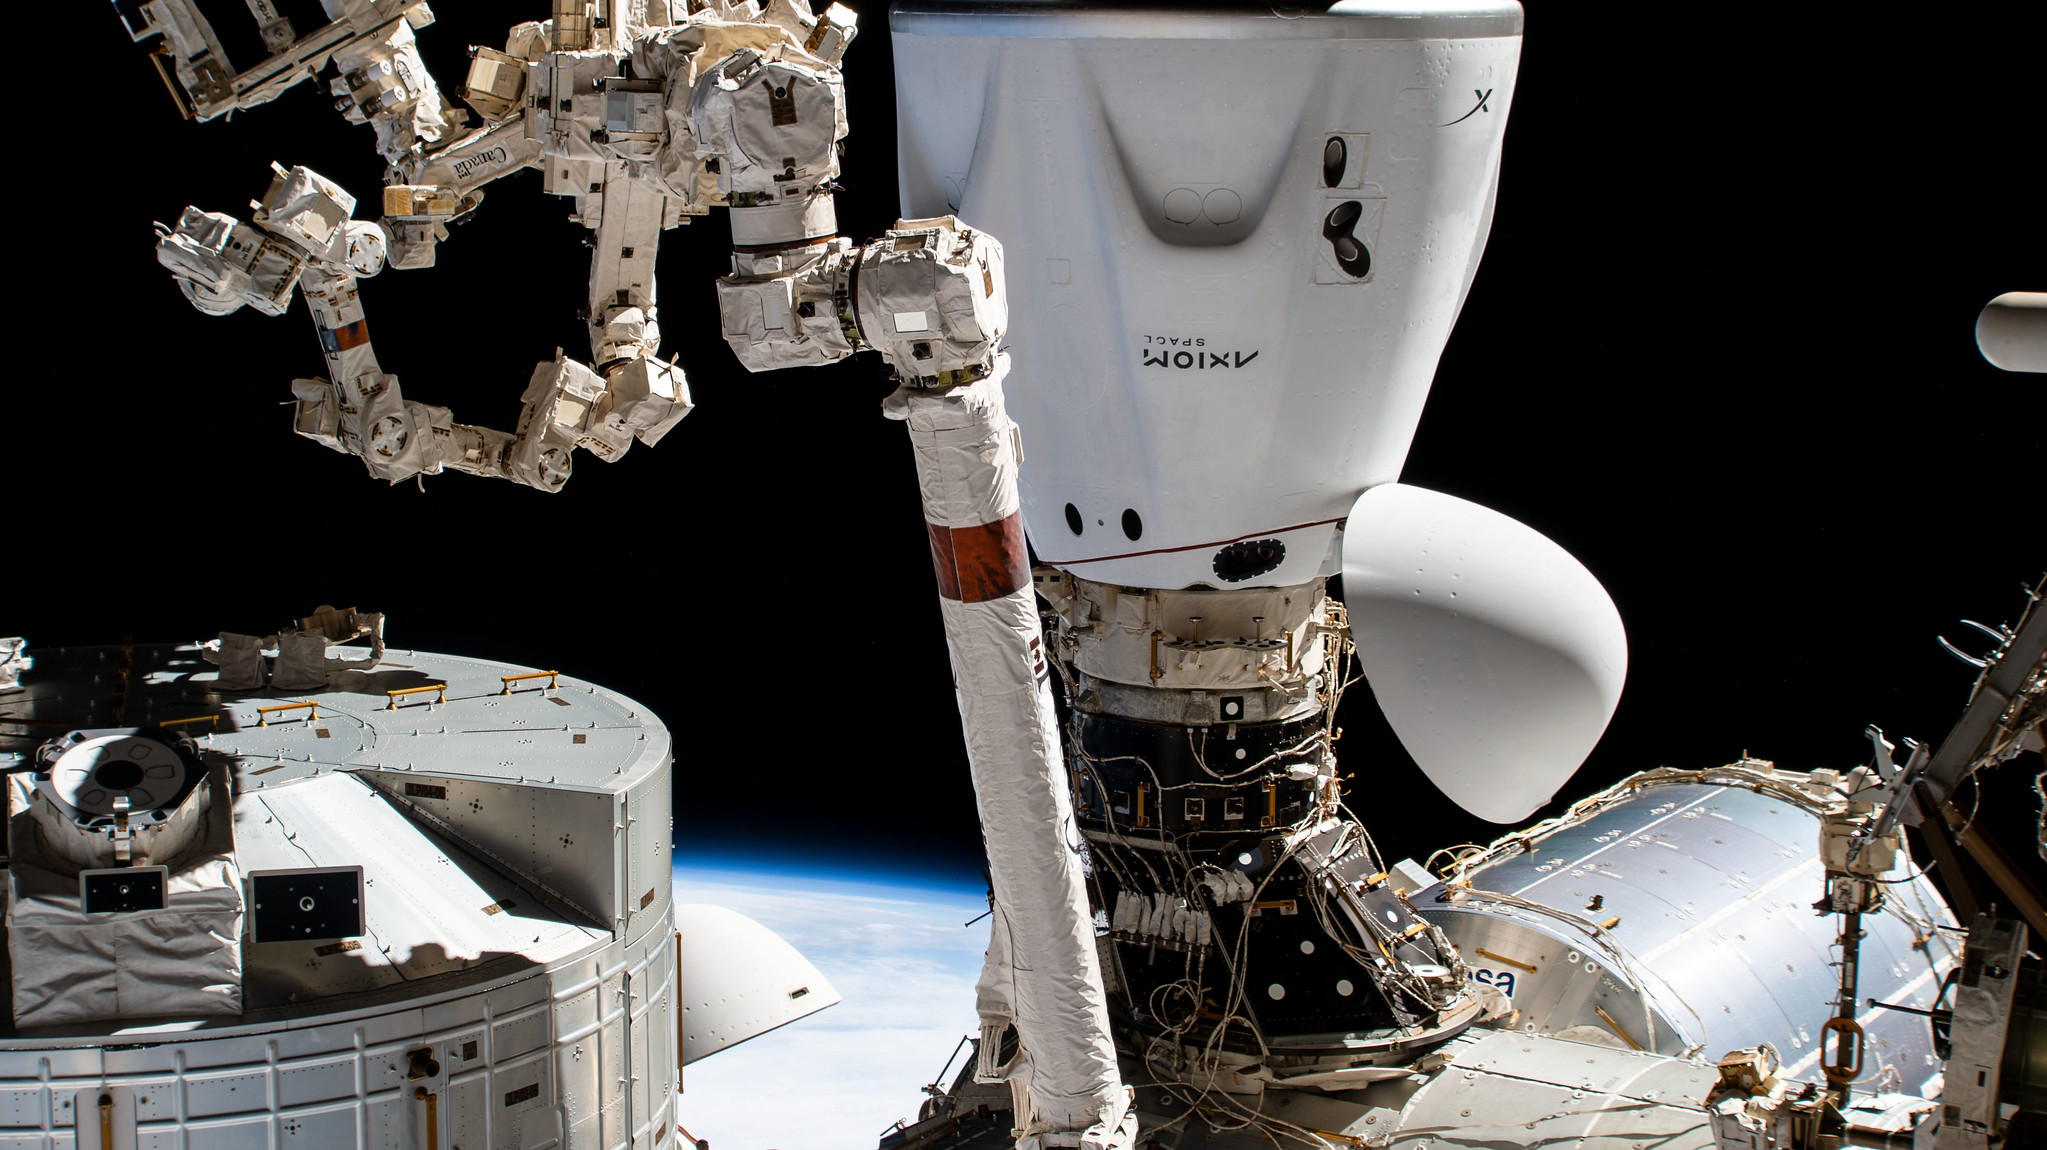 The SpaceX Dragon Endeavour crew ship is pictured docked to the Harmony module's space-facing international docking adapter.